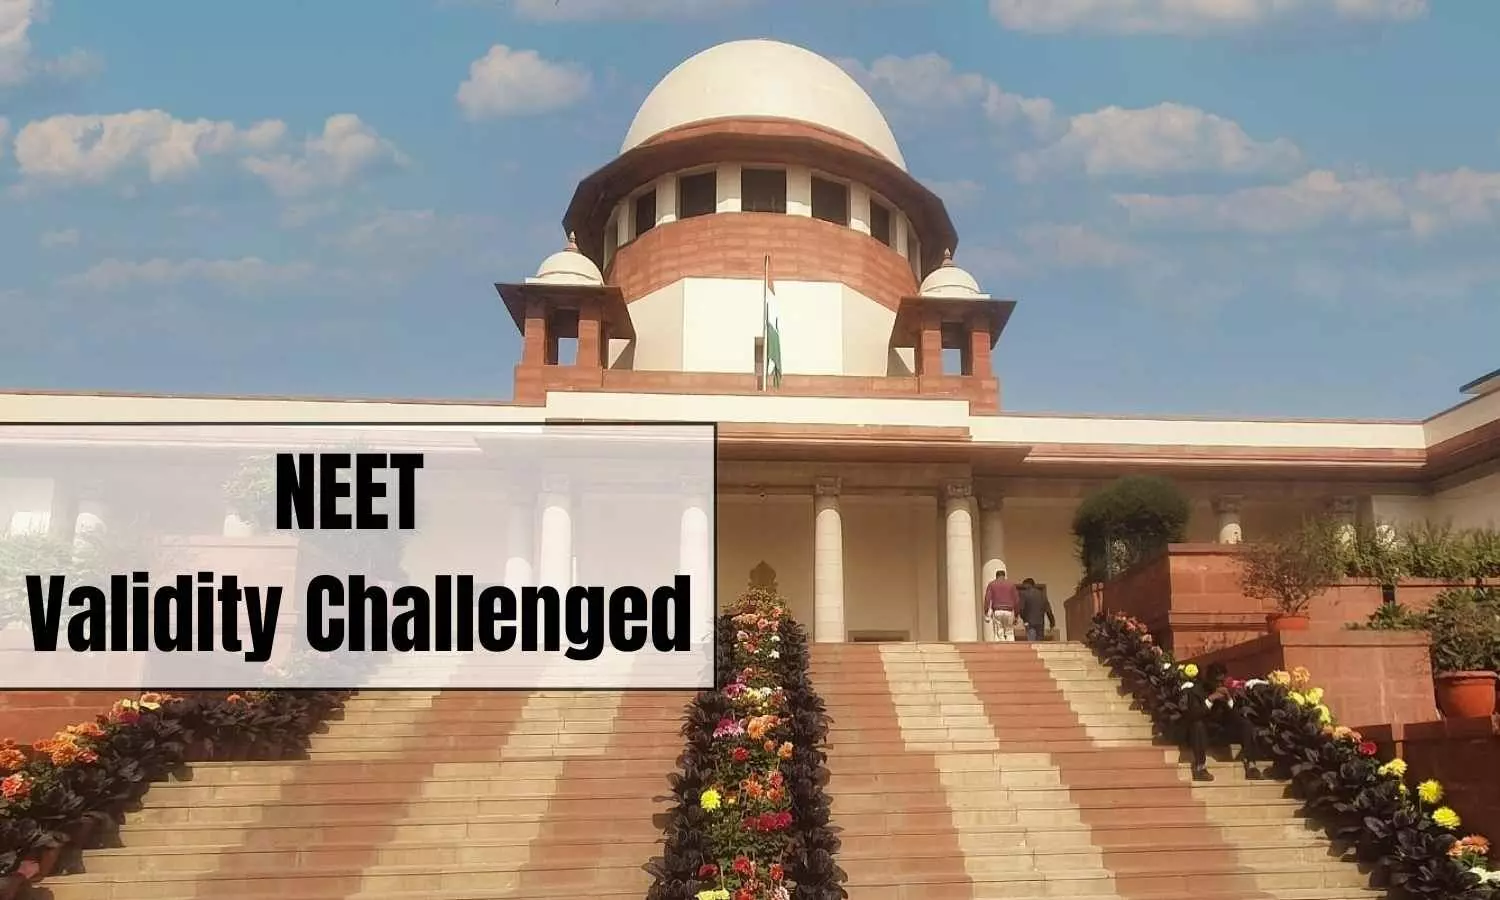 NEET violates federal Structure: Tamil Nadu moves Supreme Court challenging validity of MBBS entrance test